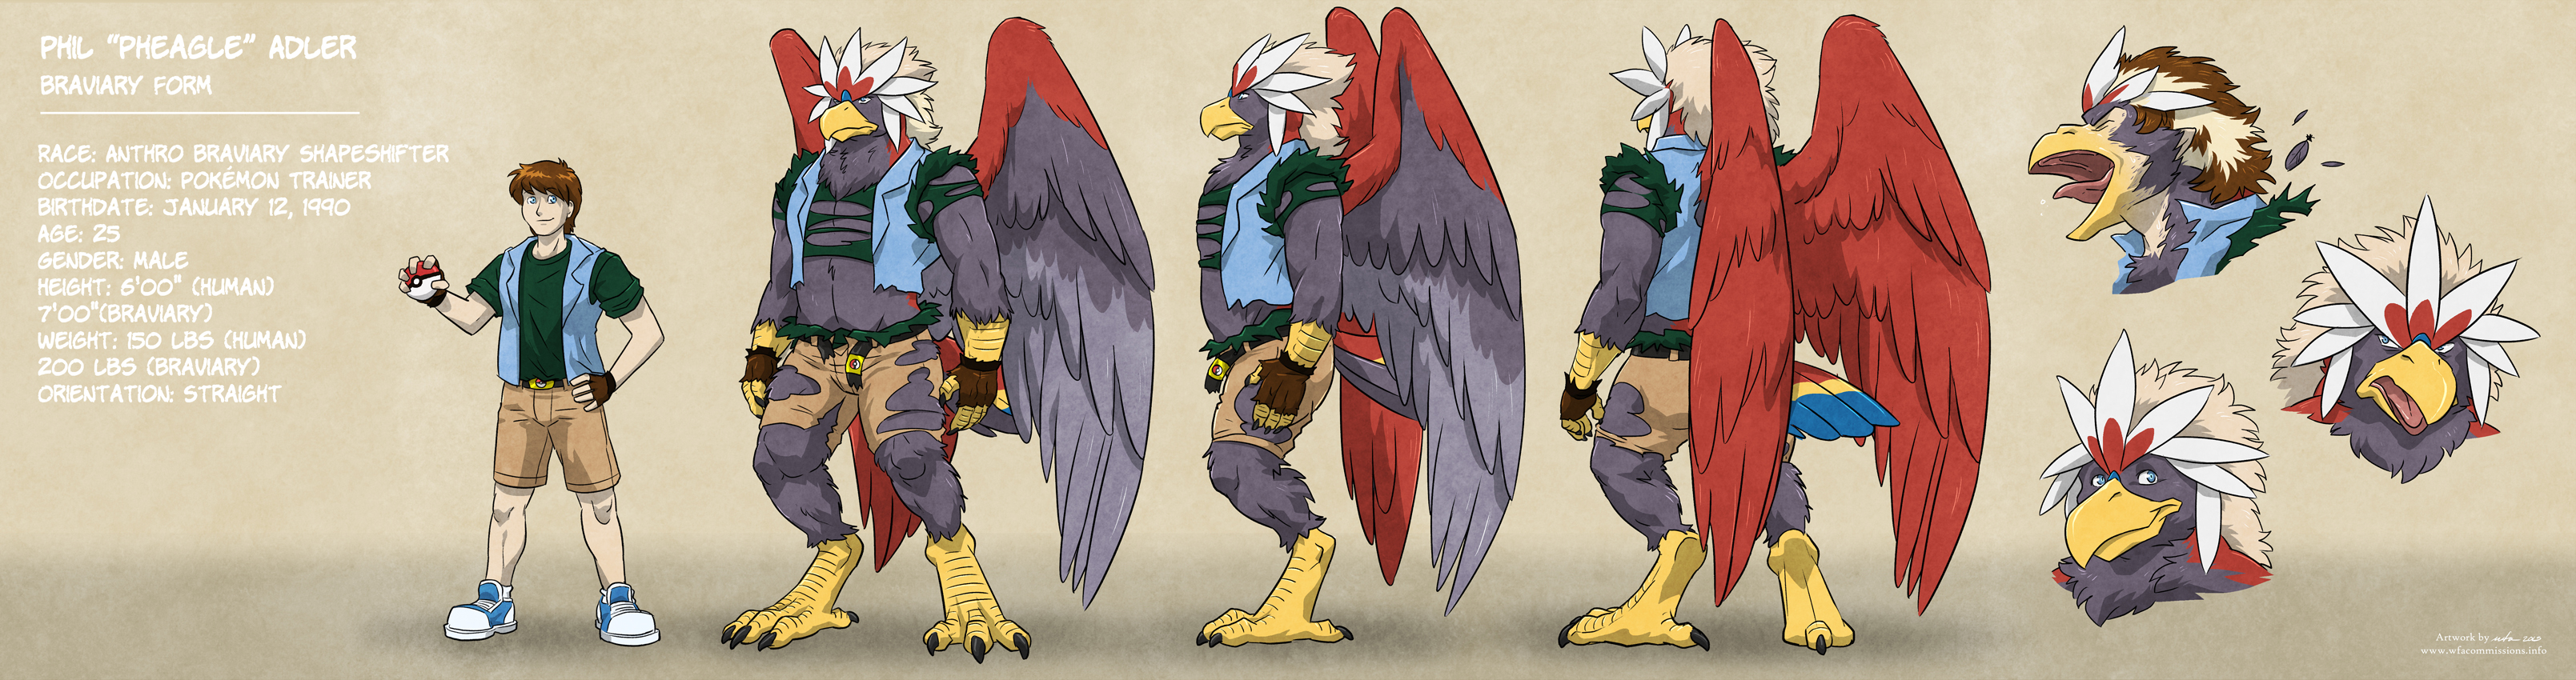 Phil "Pheagle" Adler - Braviary Form: Model Sheet by. 